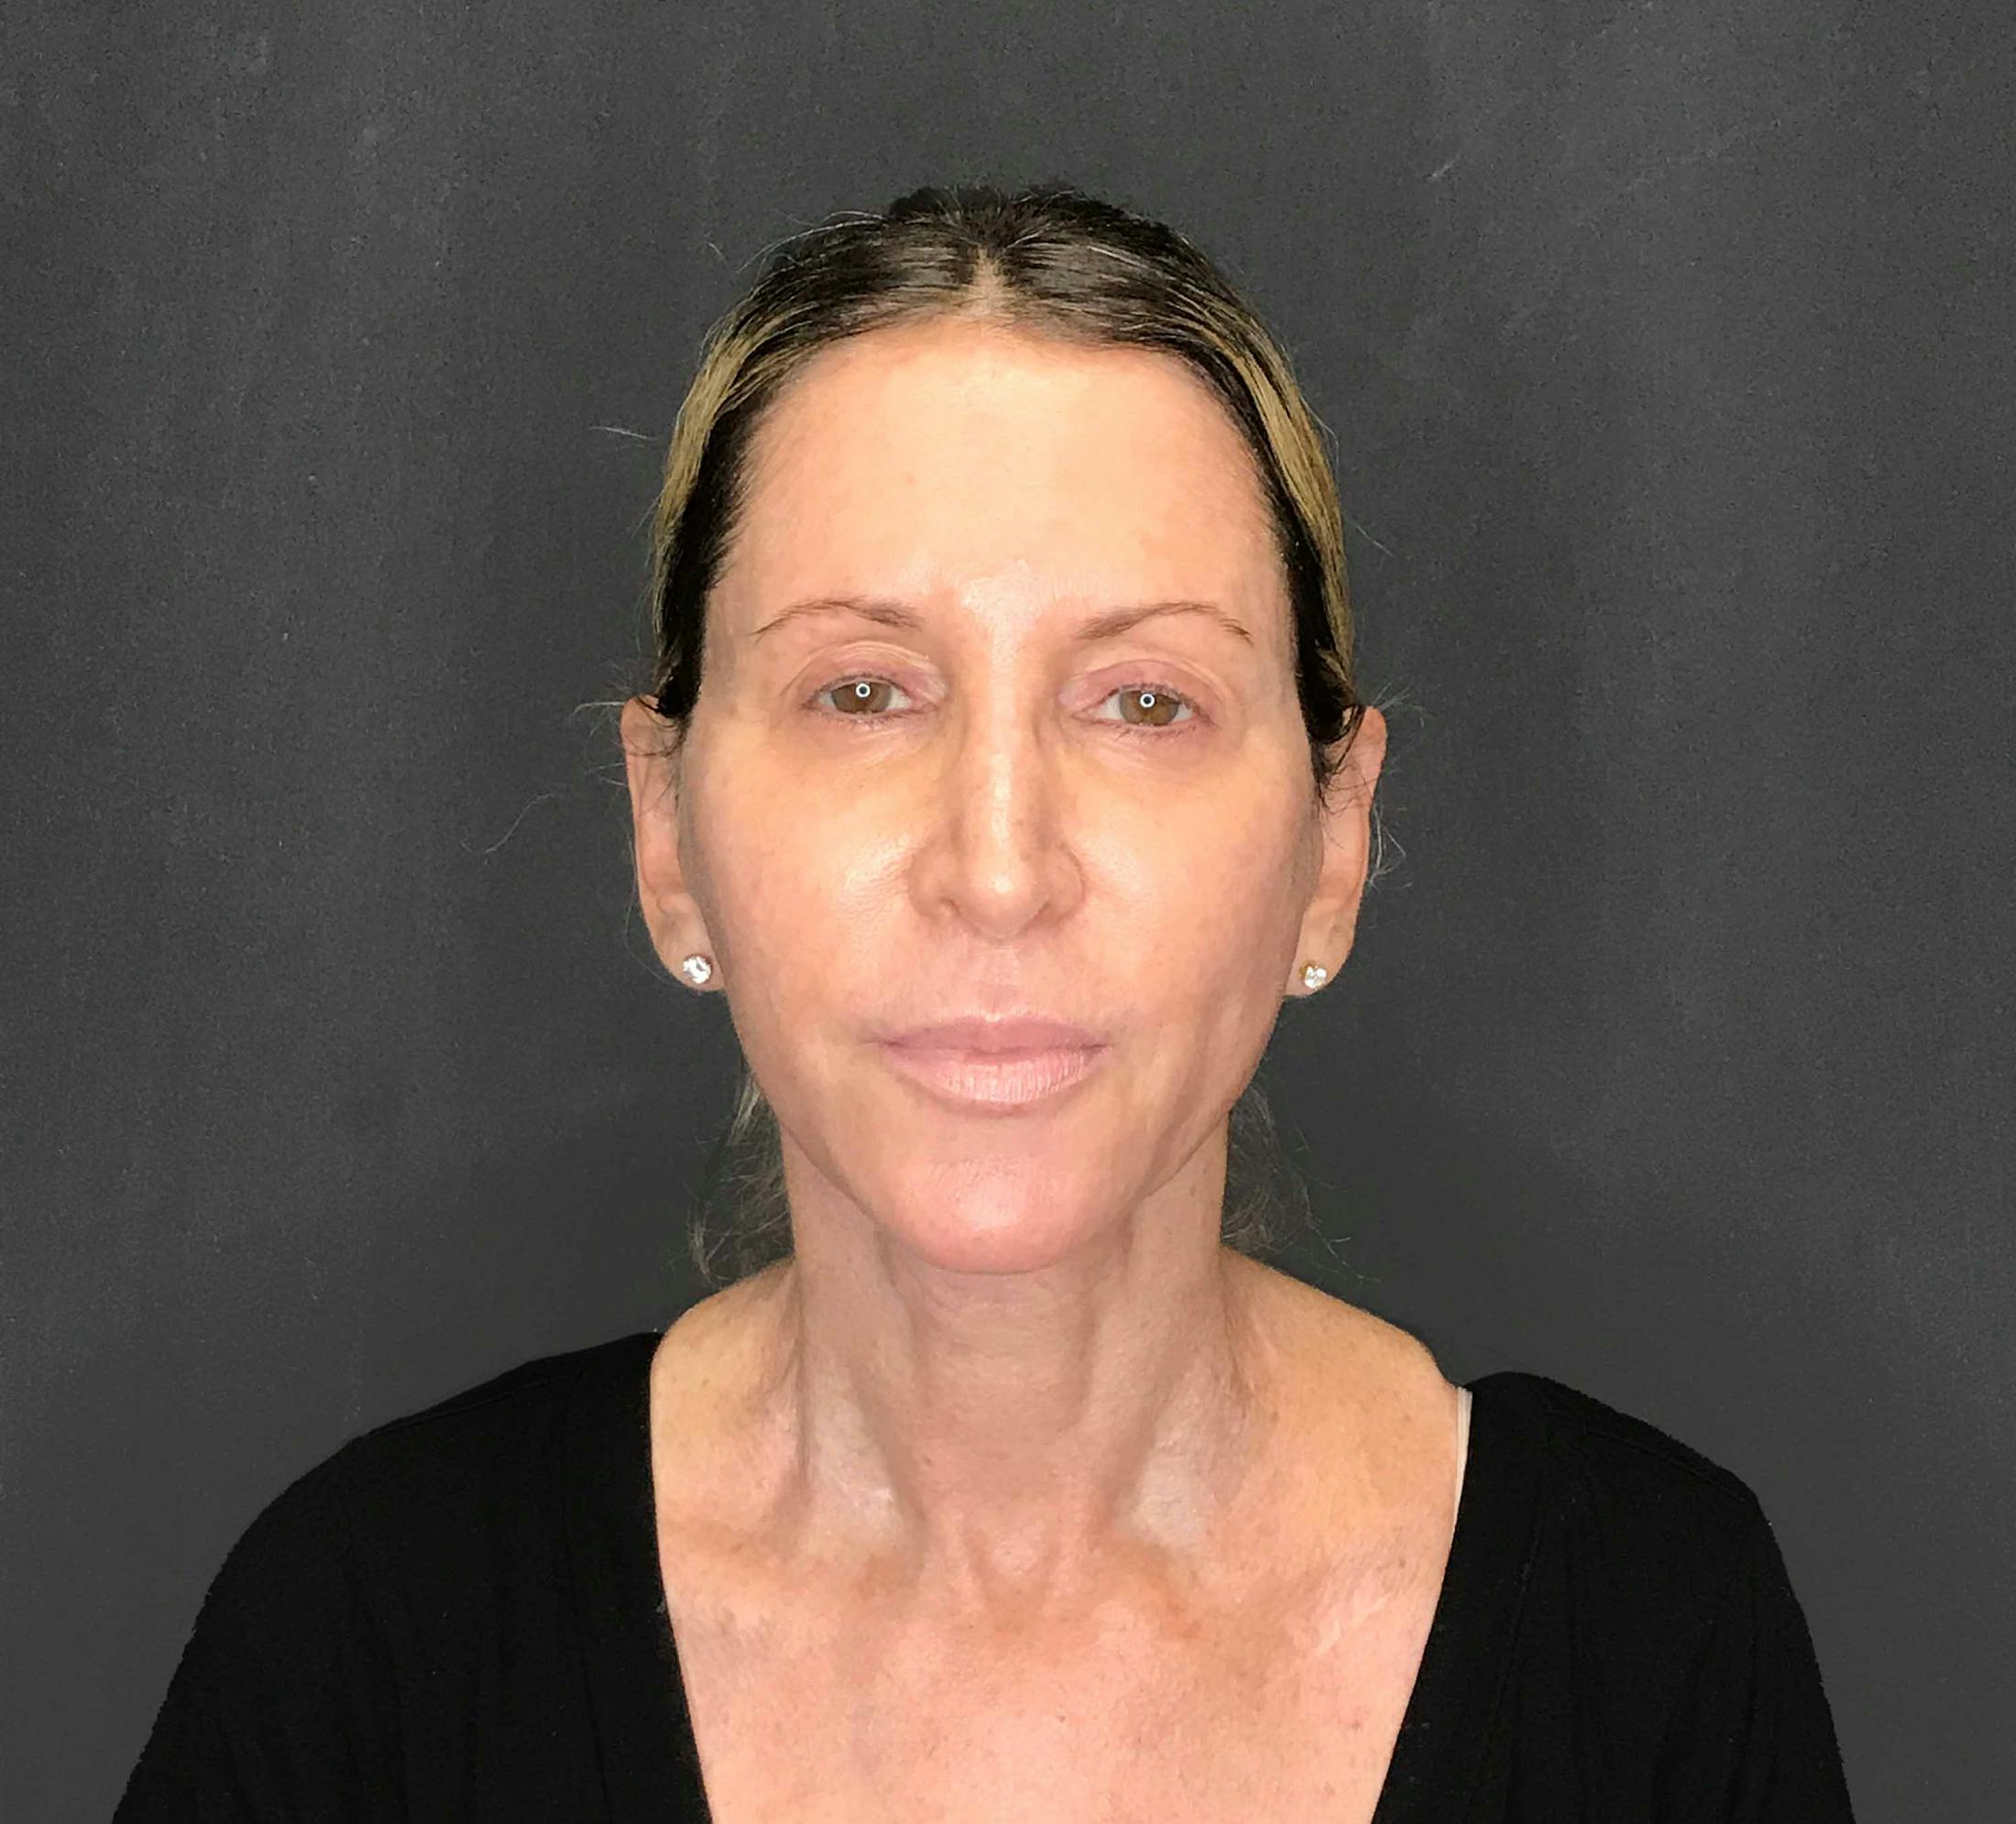 Facelift & Necklift after in NYC front view p#1